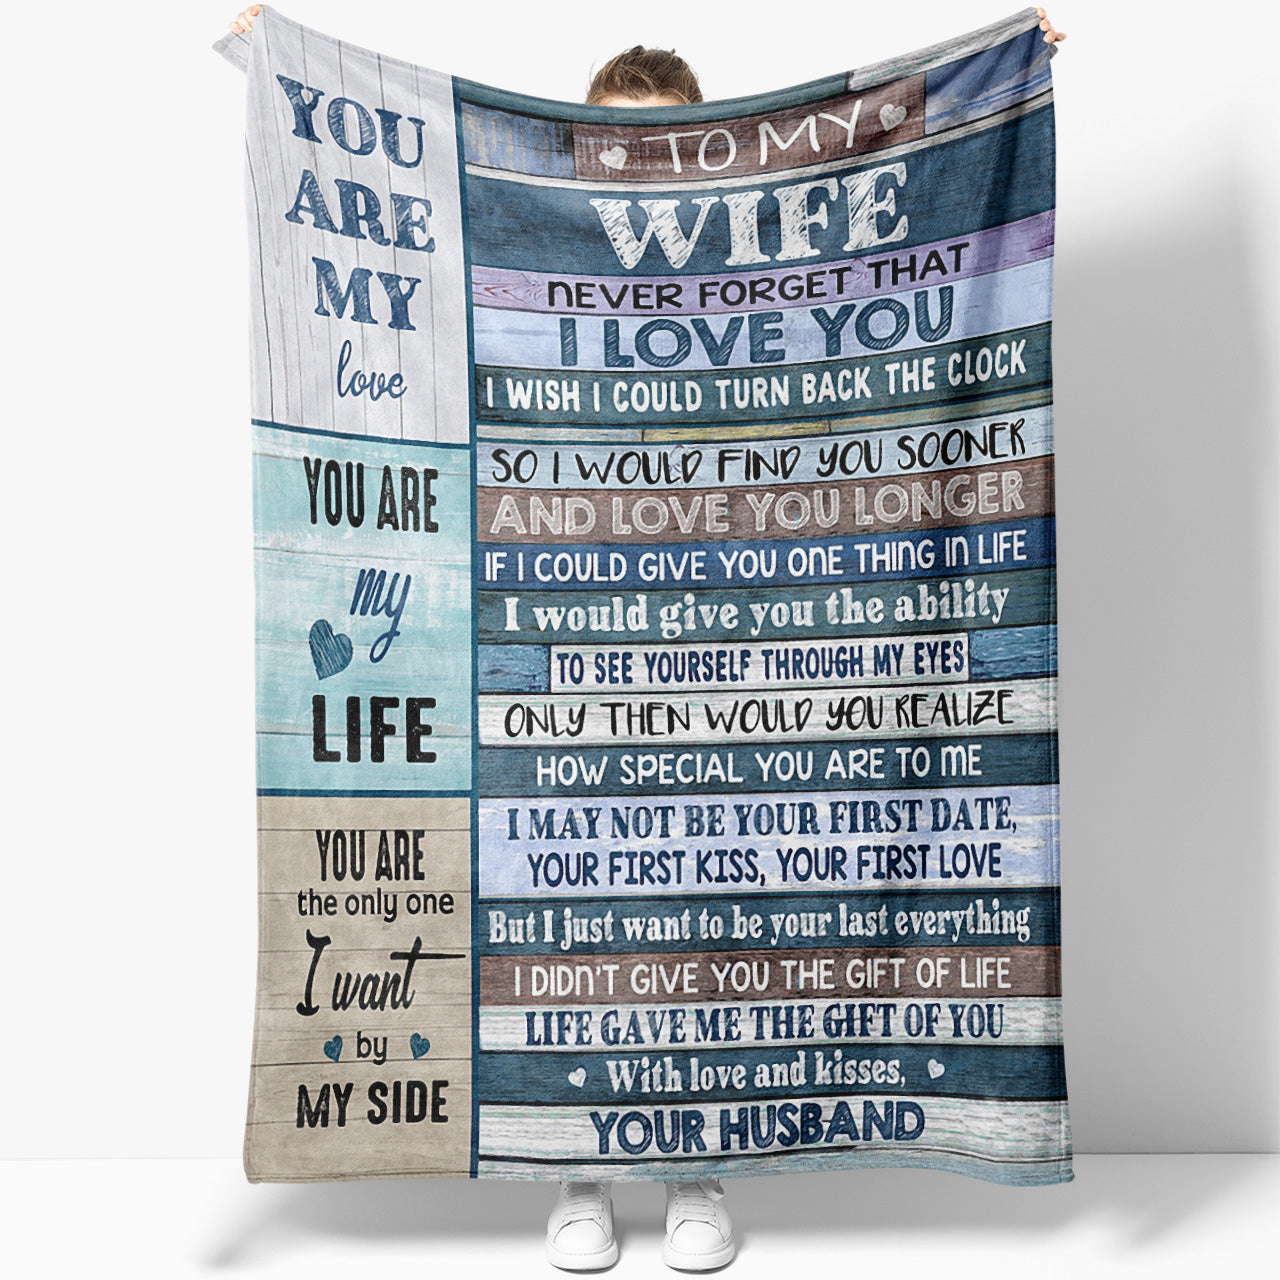 Blanket Gift For Wife, Christmas Gifts For Her, Christmas Gift Ideas For Wife, You Are My Life